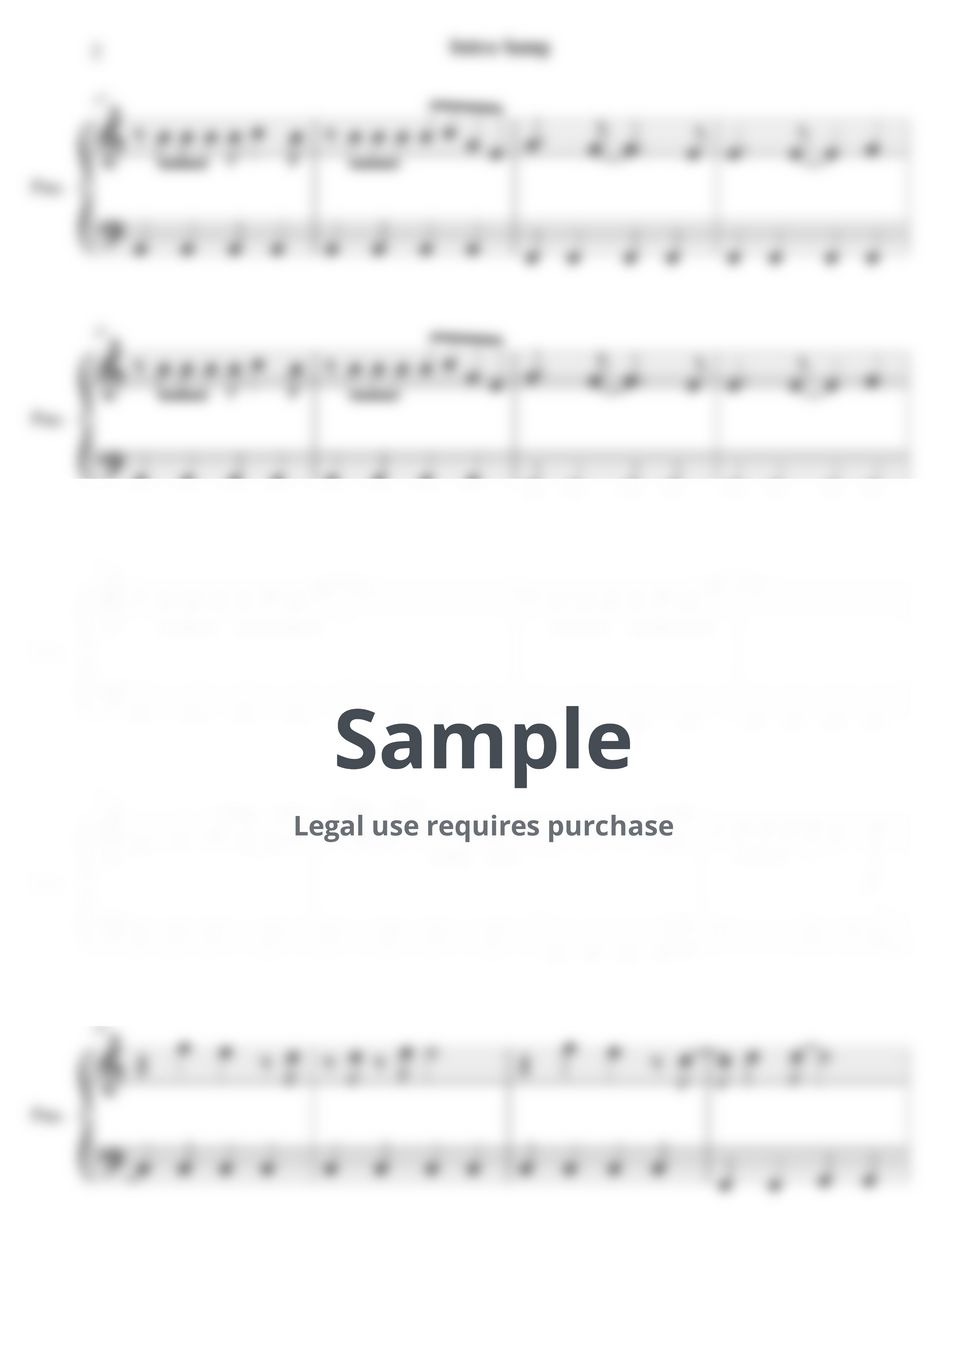 Five Nights at Freddy's - Security Breach Opening Sheet music for